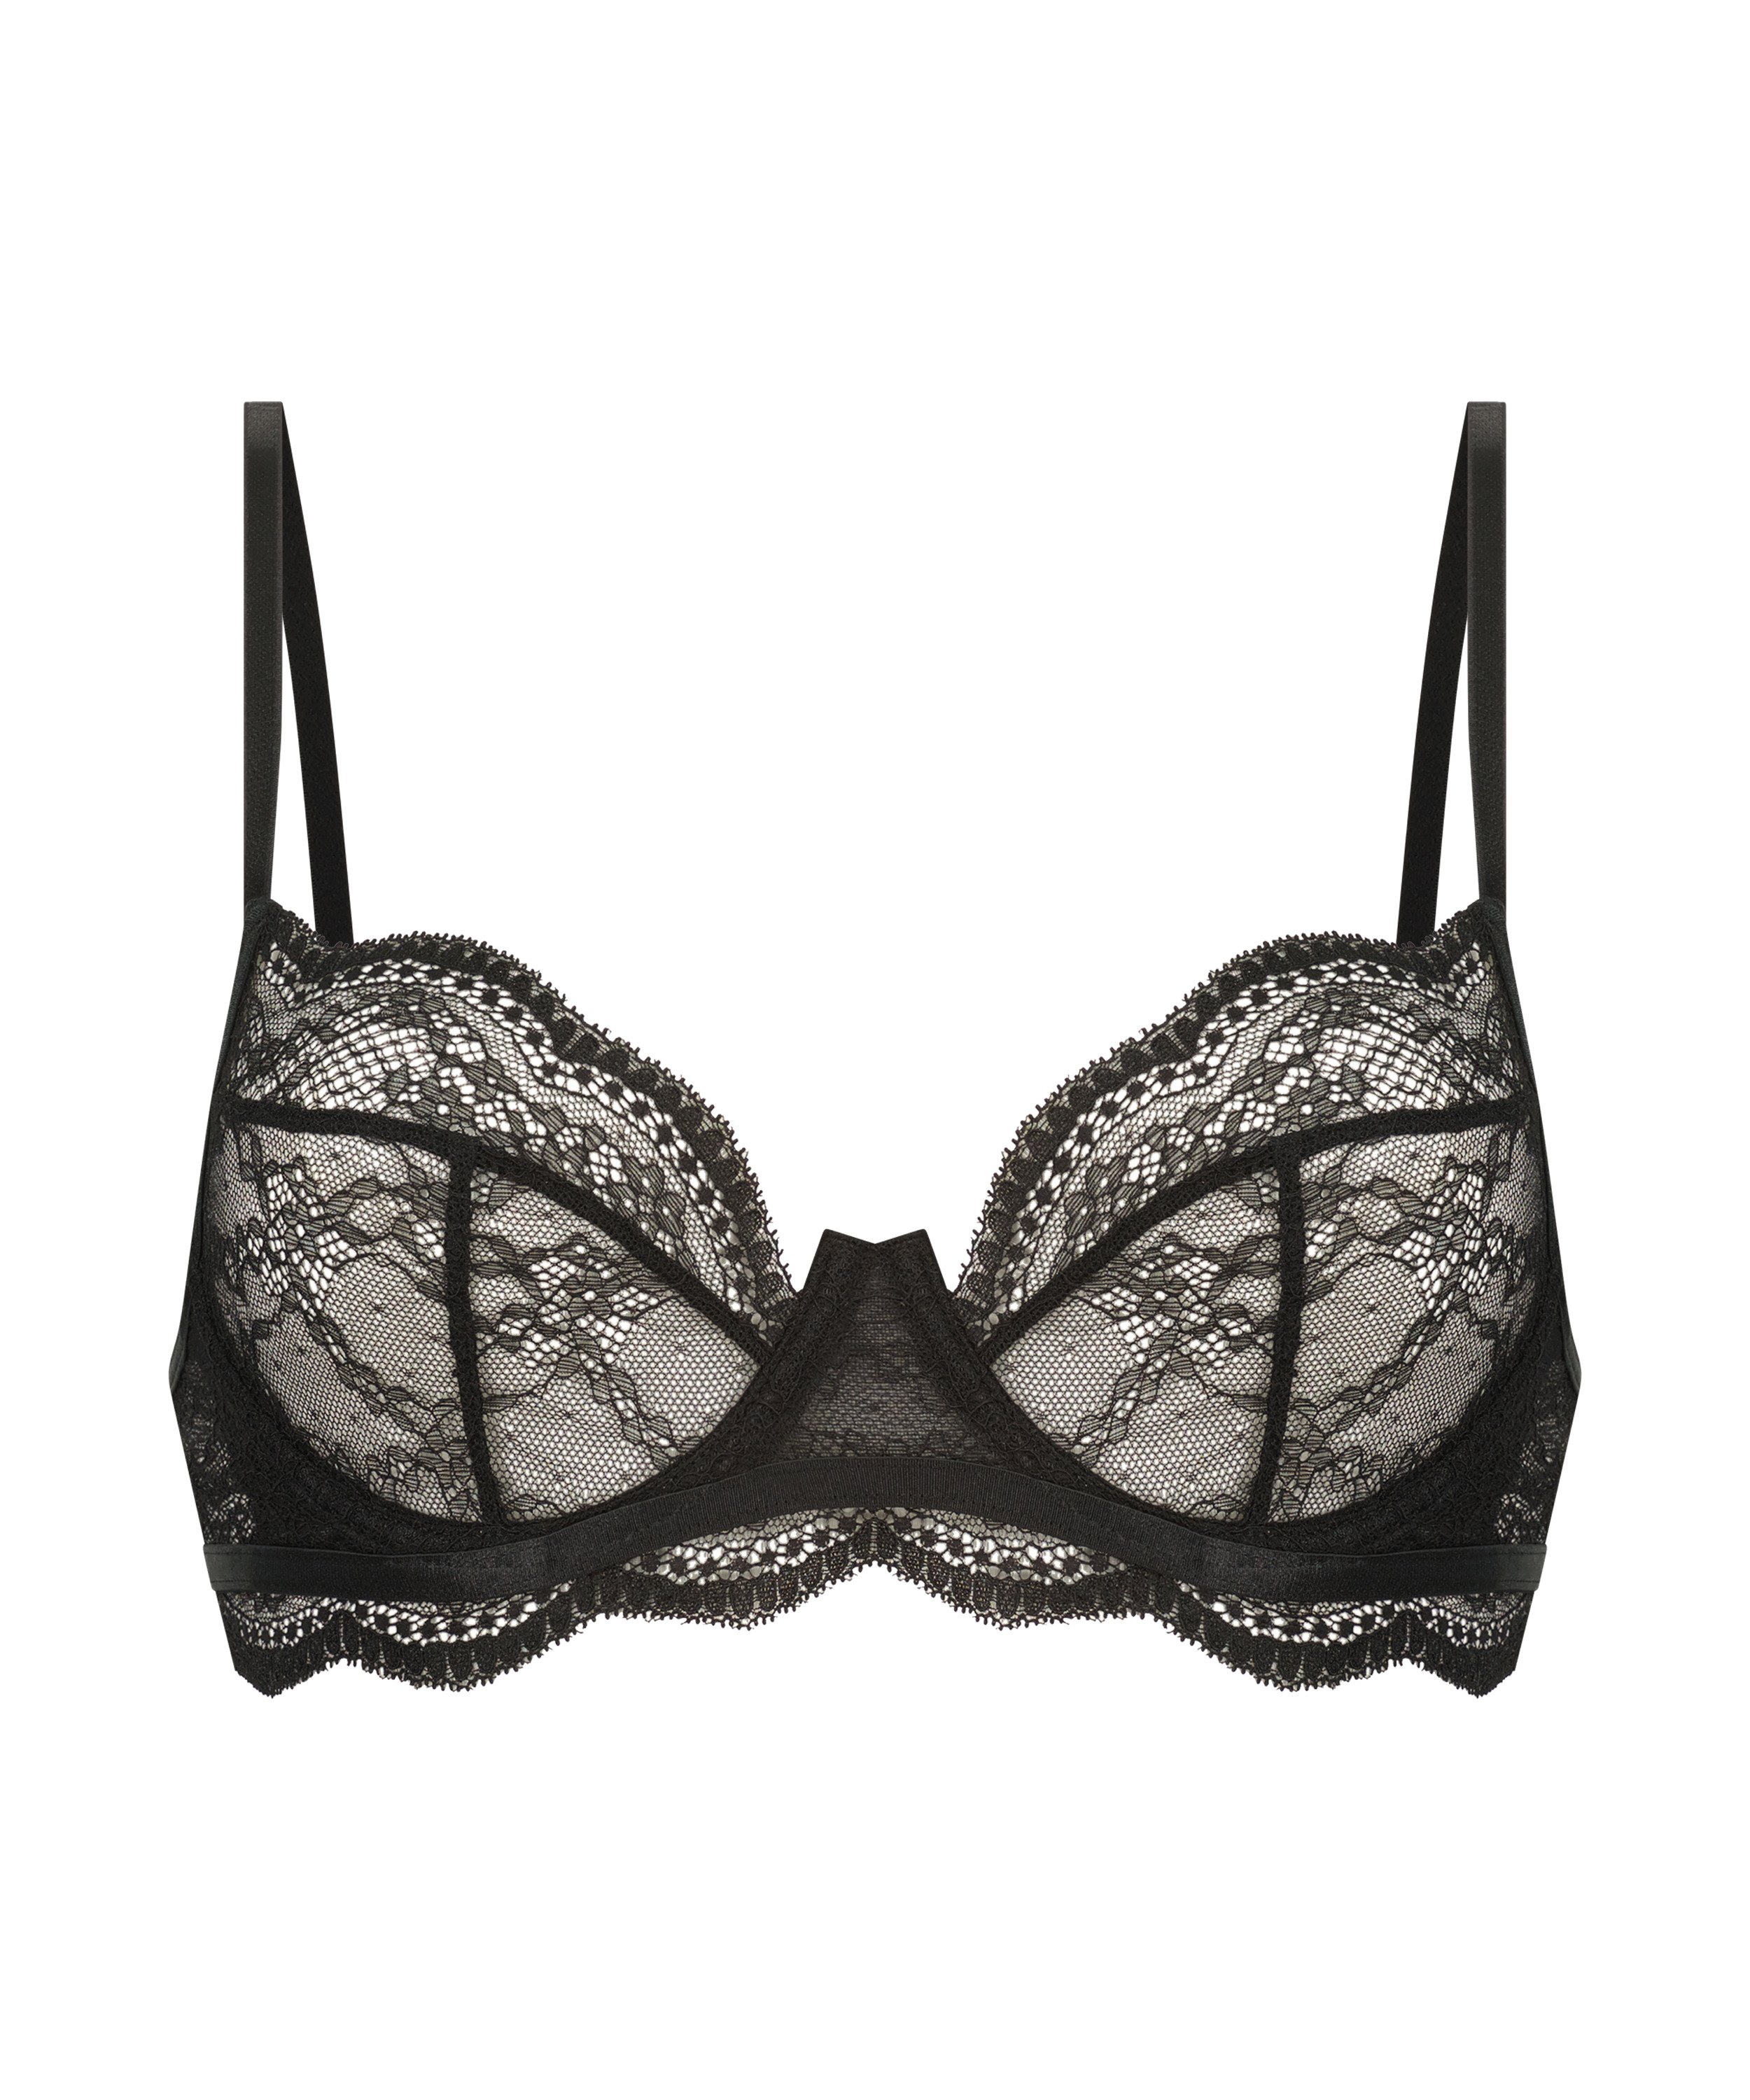 Isabelle non-padded underwired bra for €33.99 - Delicious Demi - Hunkemöller